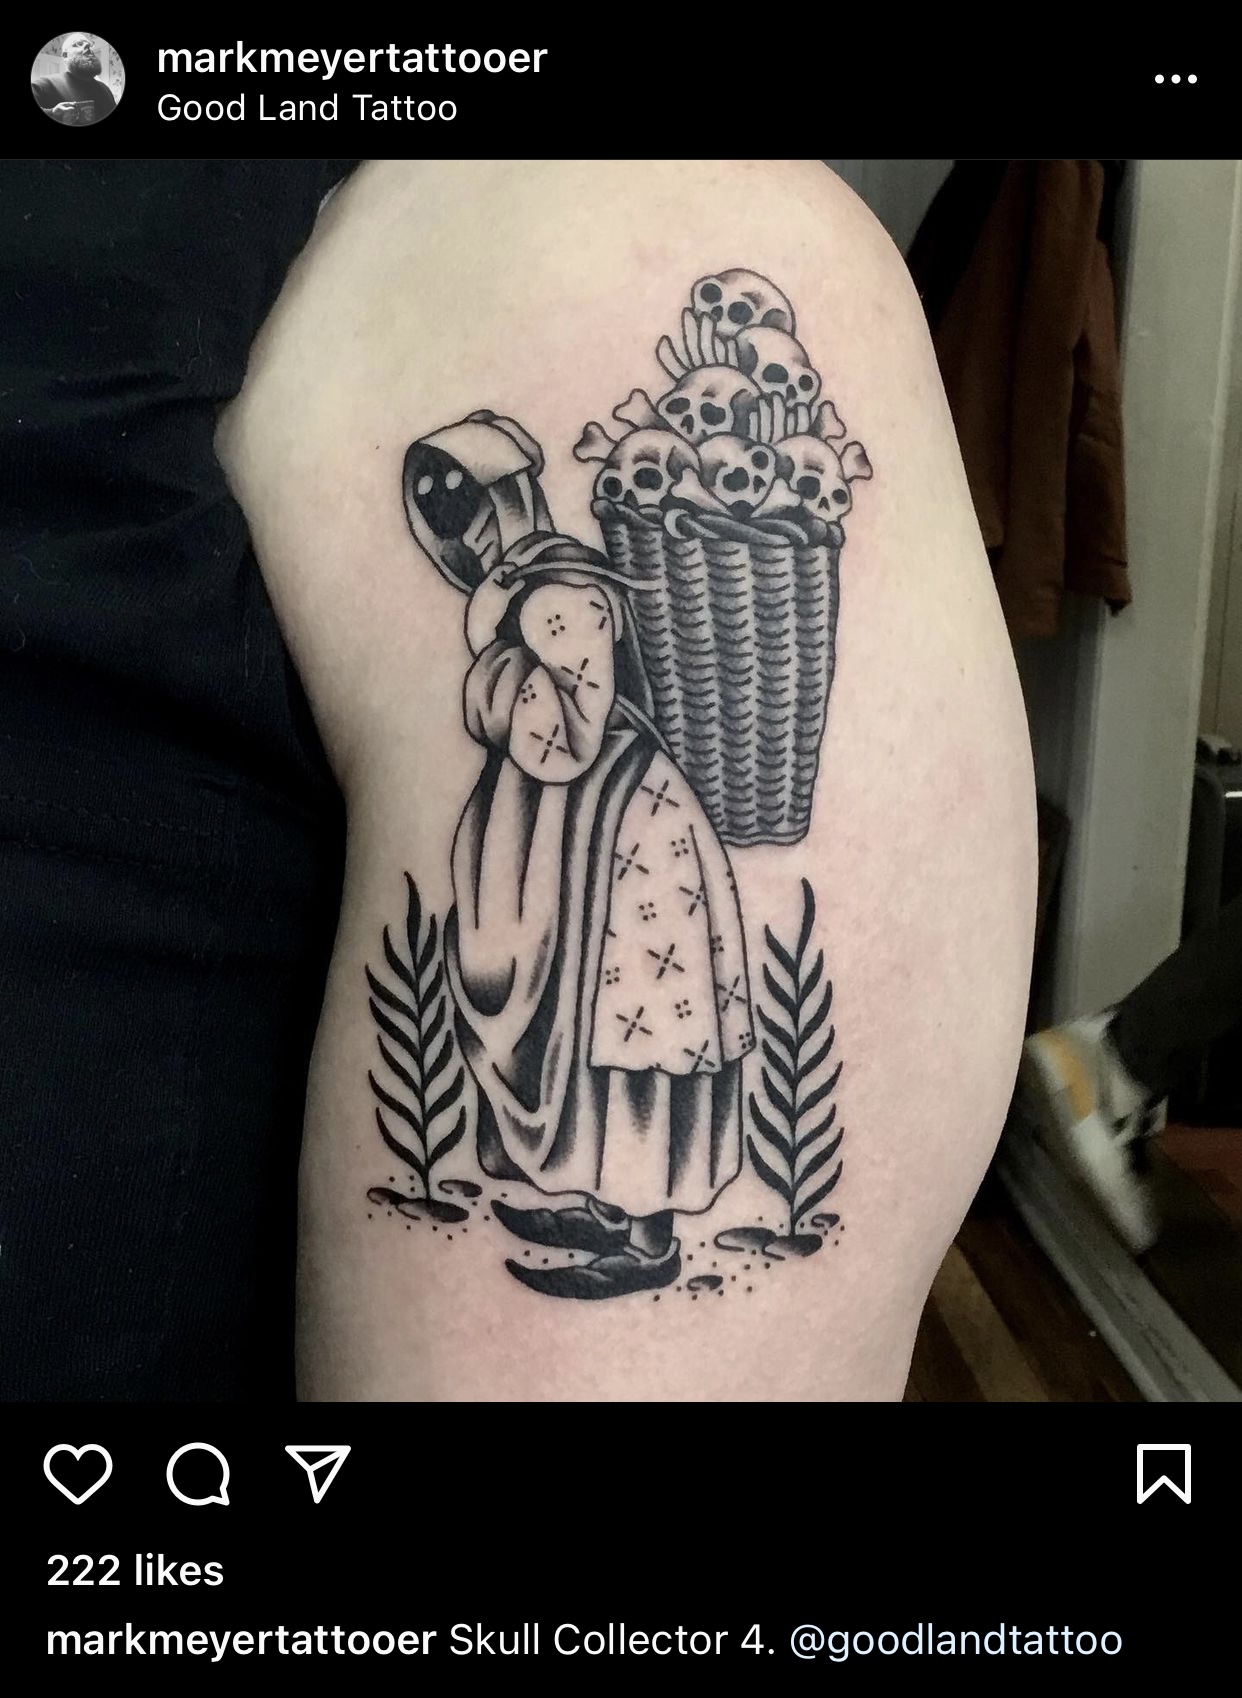 Black ink tattoo on light skinned upper arm of faceless person in flawy dress and apron carrying a basket of skulls on their back.